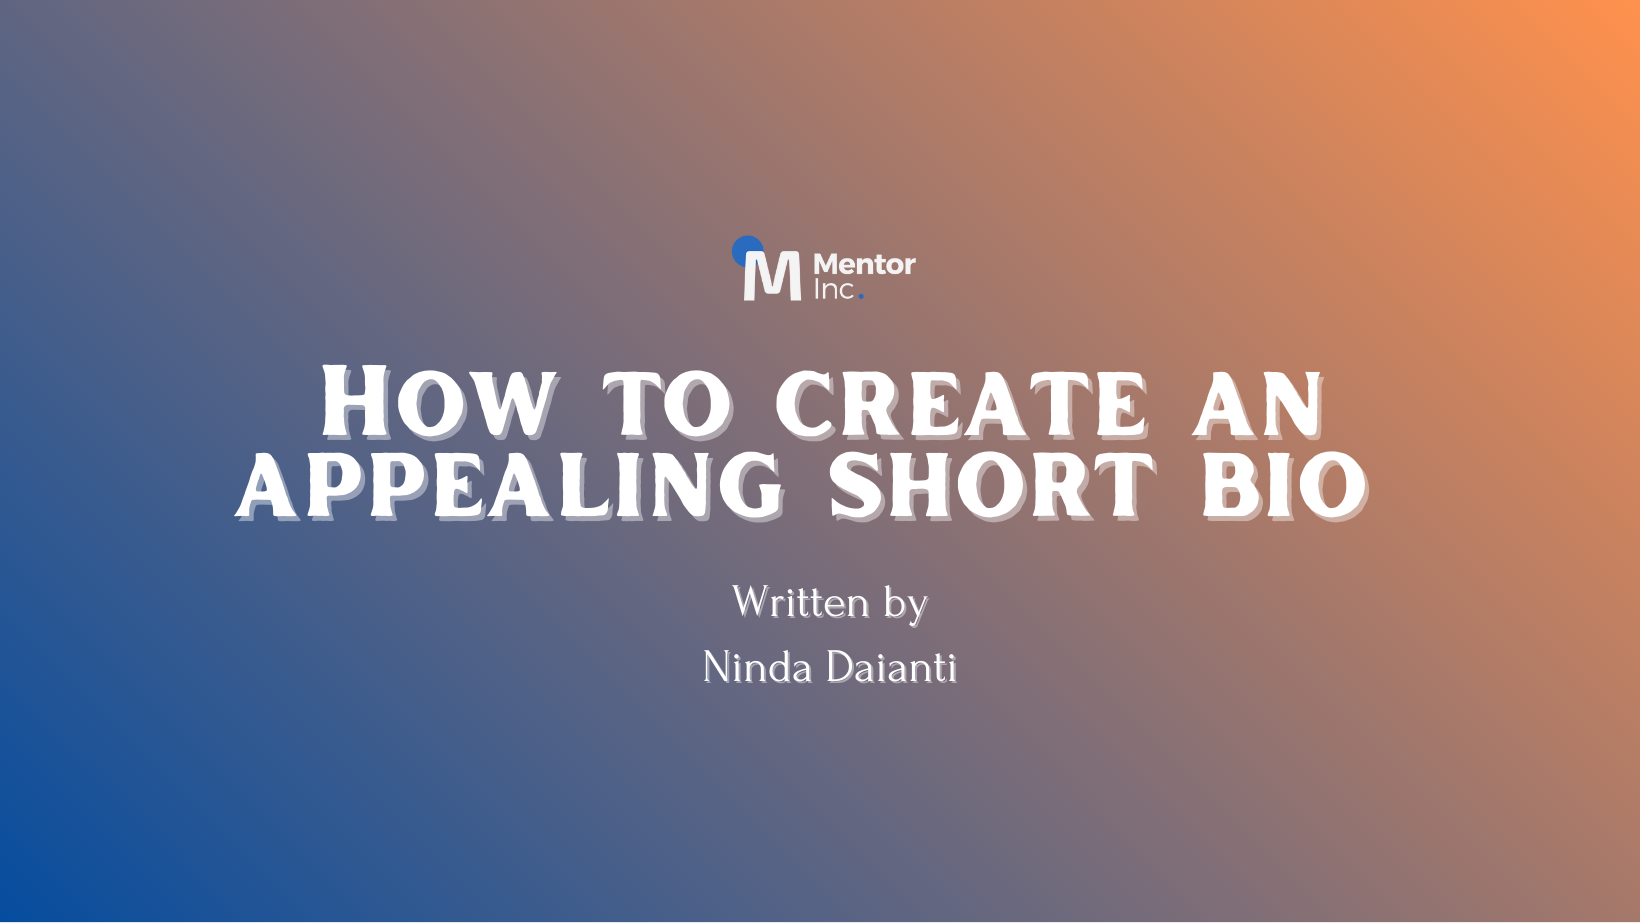 How to Create an Appealing Short Bio